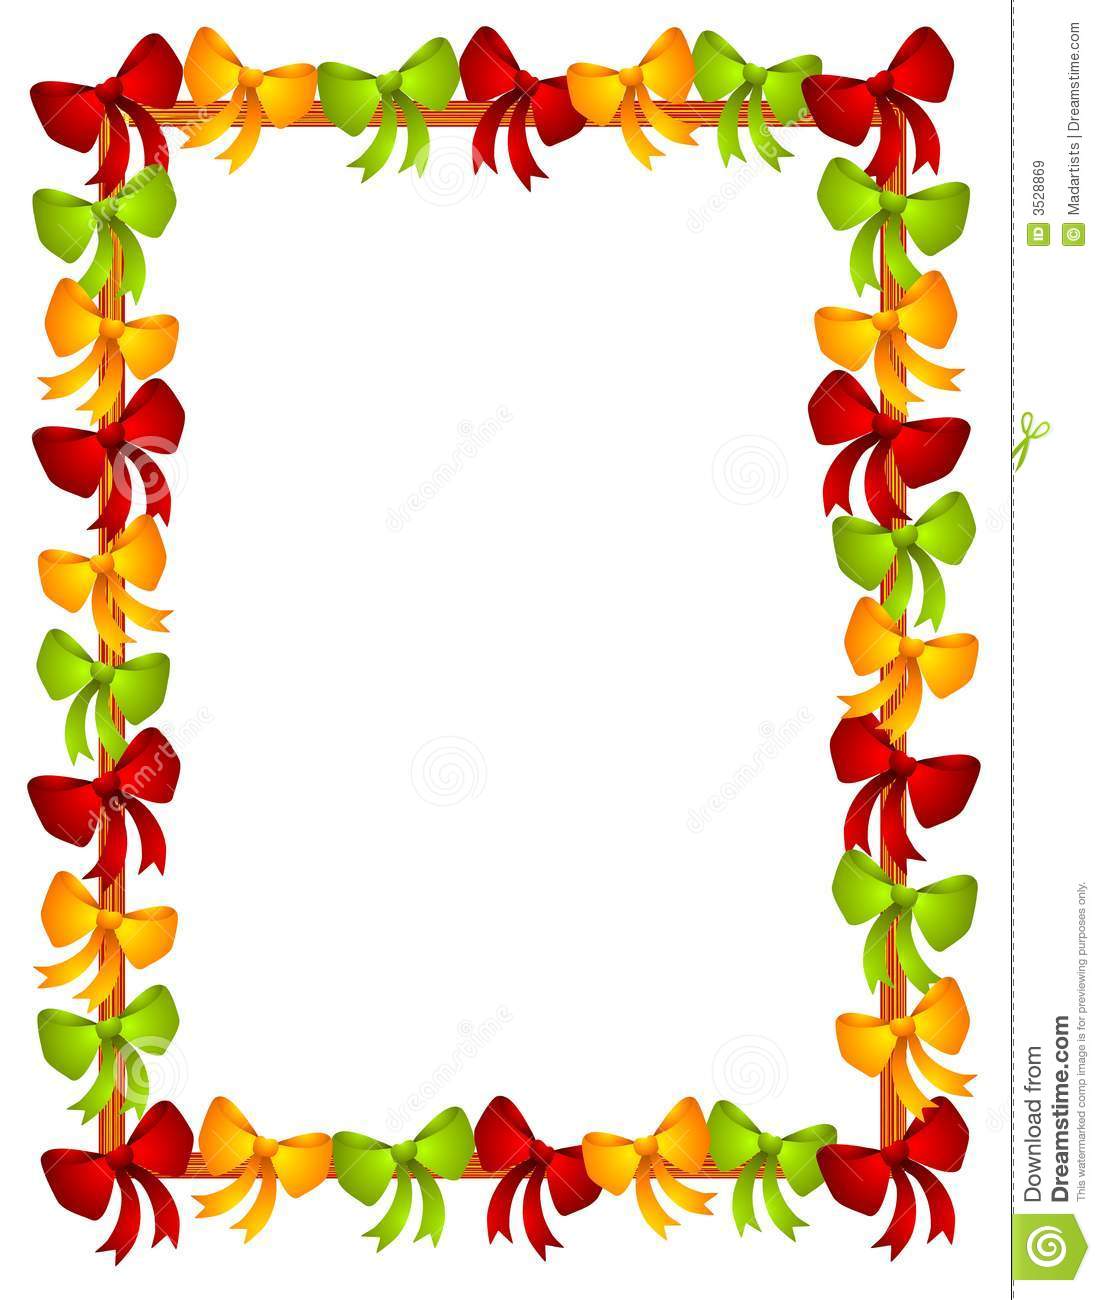 Christmas Clipart Borders Free For Mac   Clipart Panda   Free Clipart